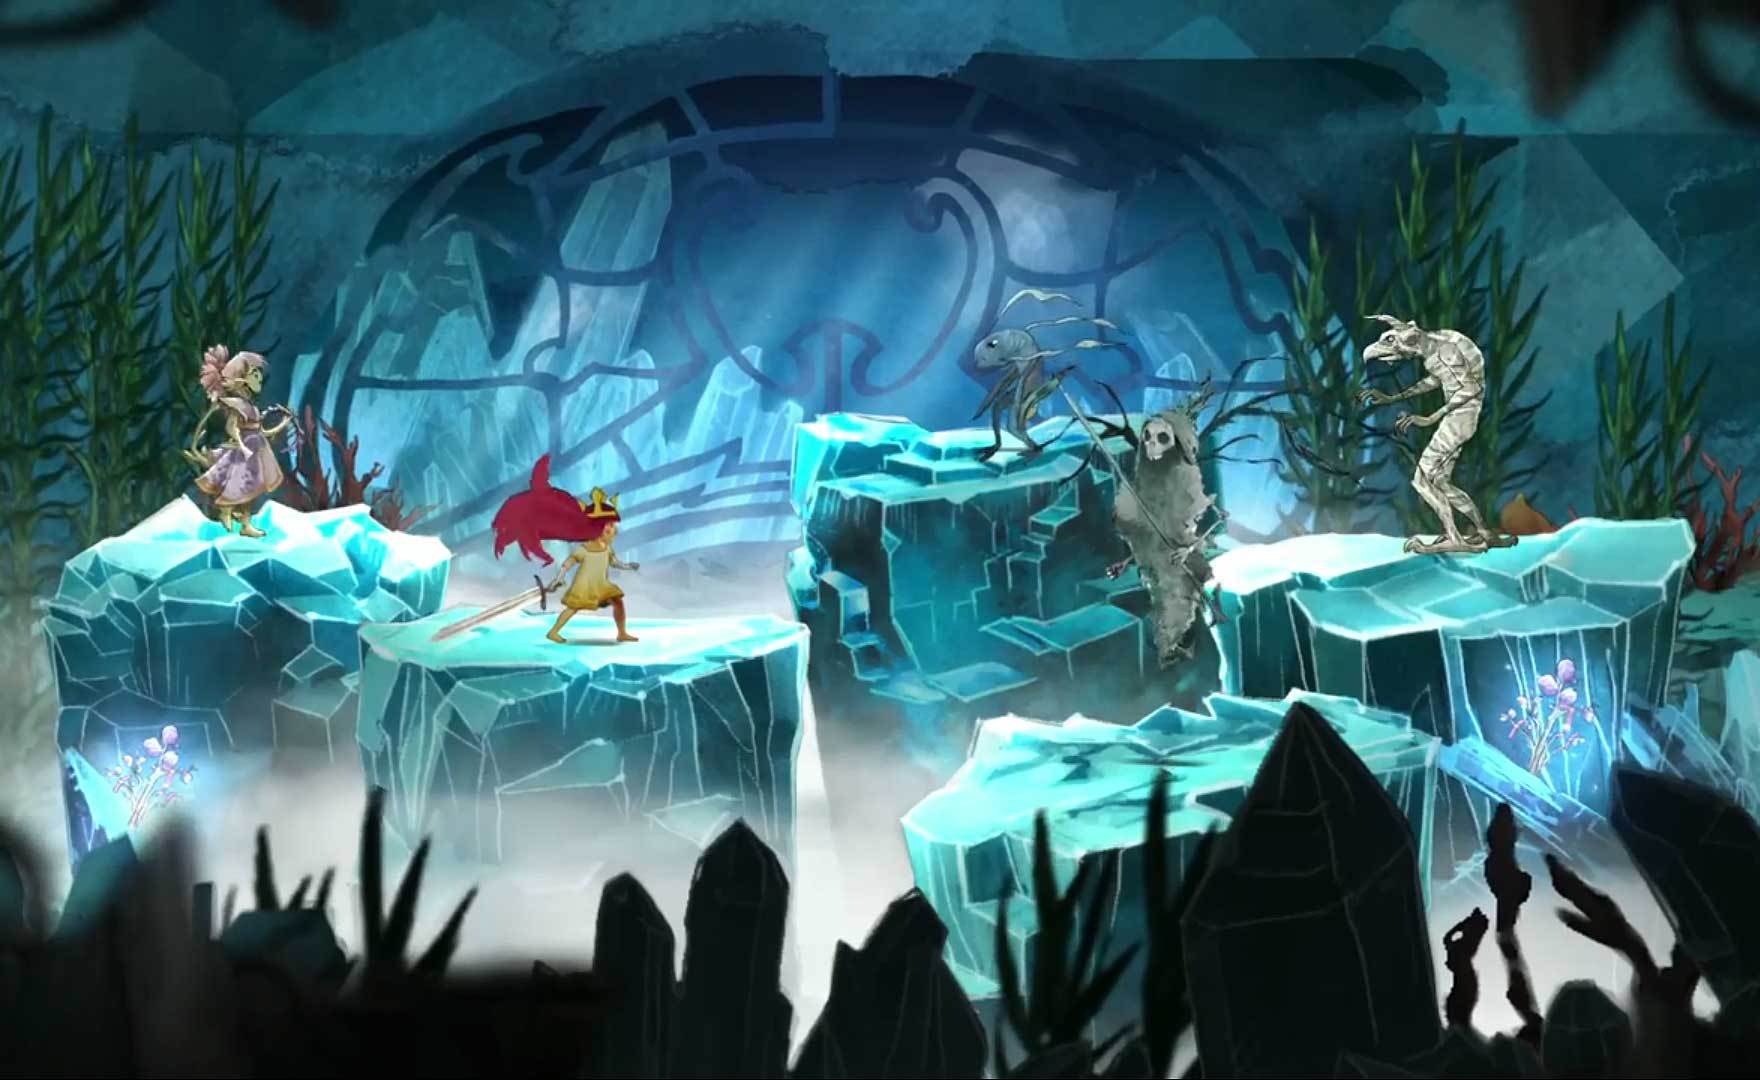 festspil meteor Apparatet Ubisoft Share Their Musical Process in New Child of Light Video - VGU